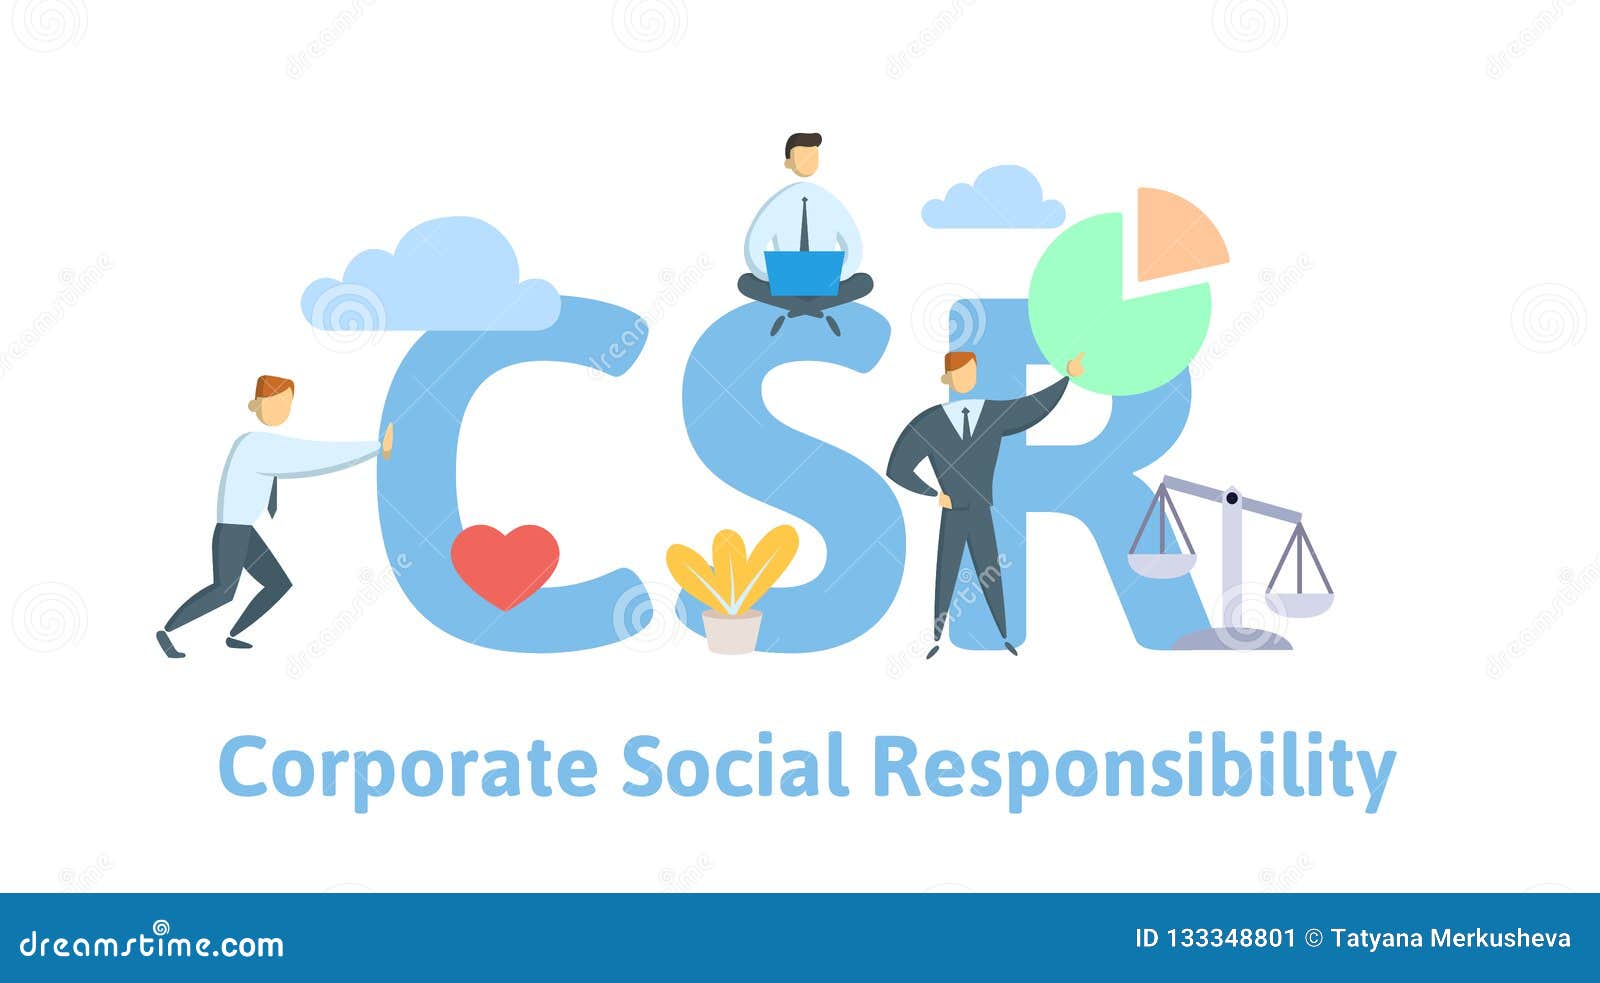 CSR, Corporate Social Responsibility. Concept with Keywords, Letters